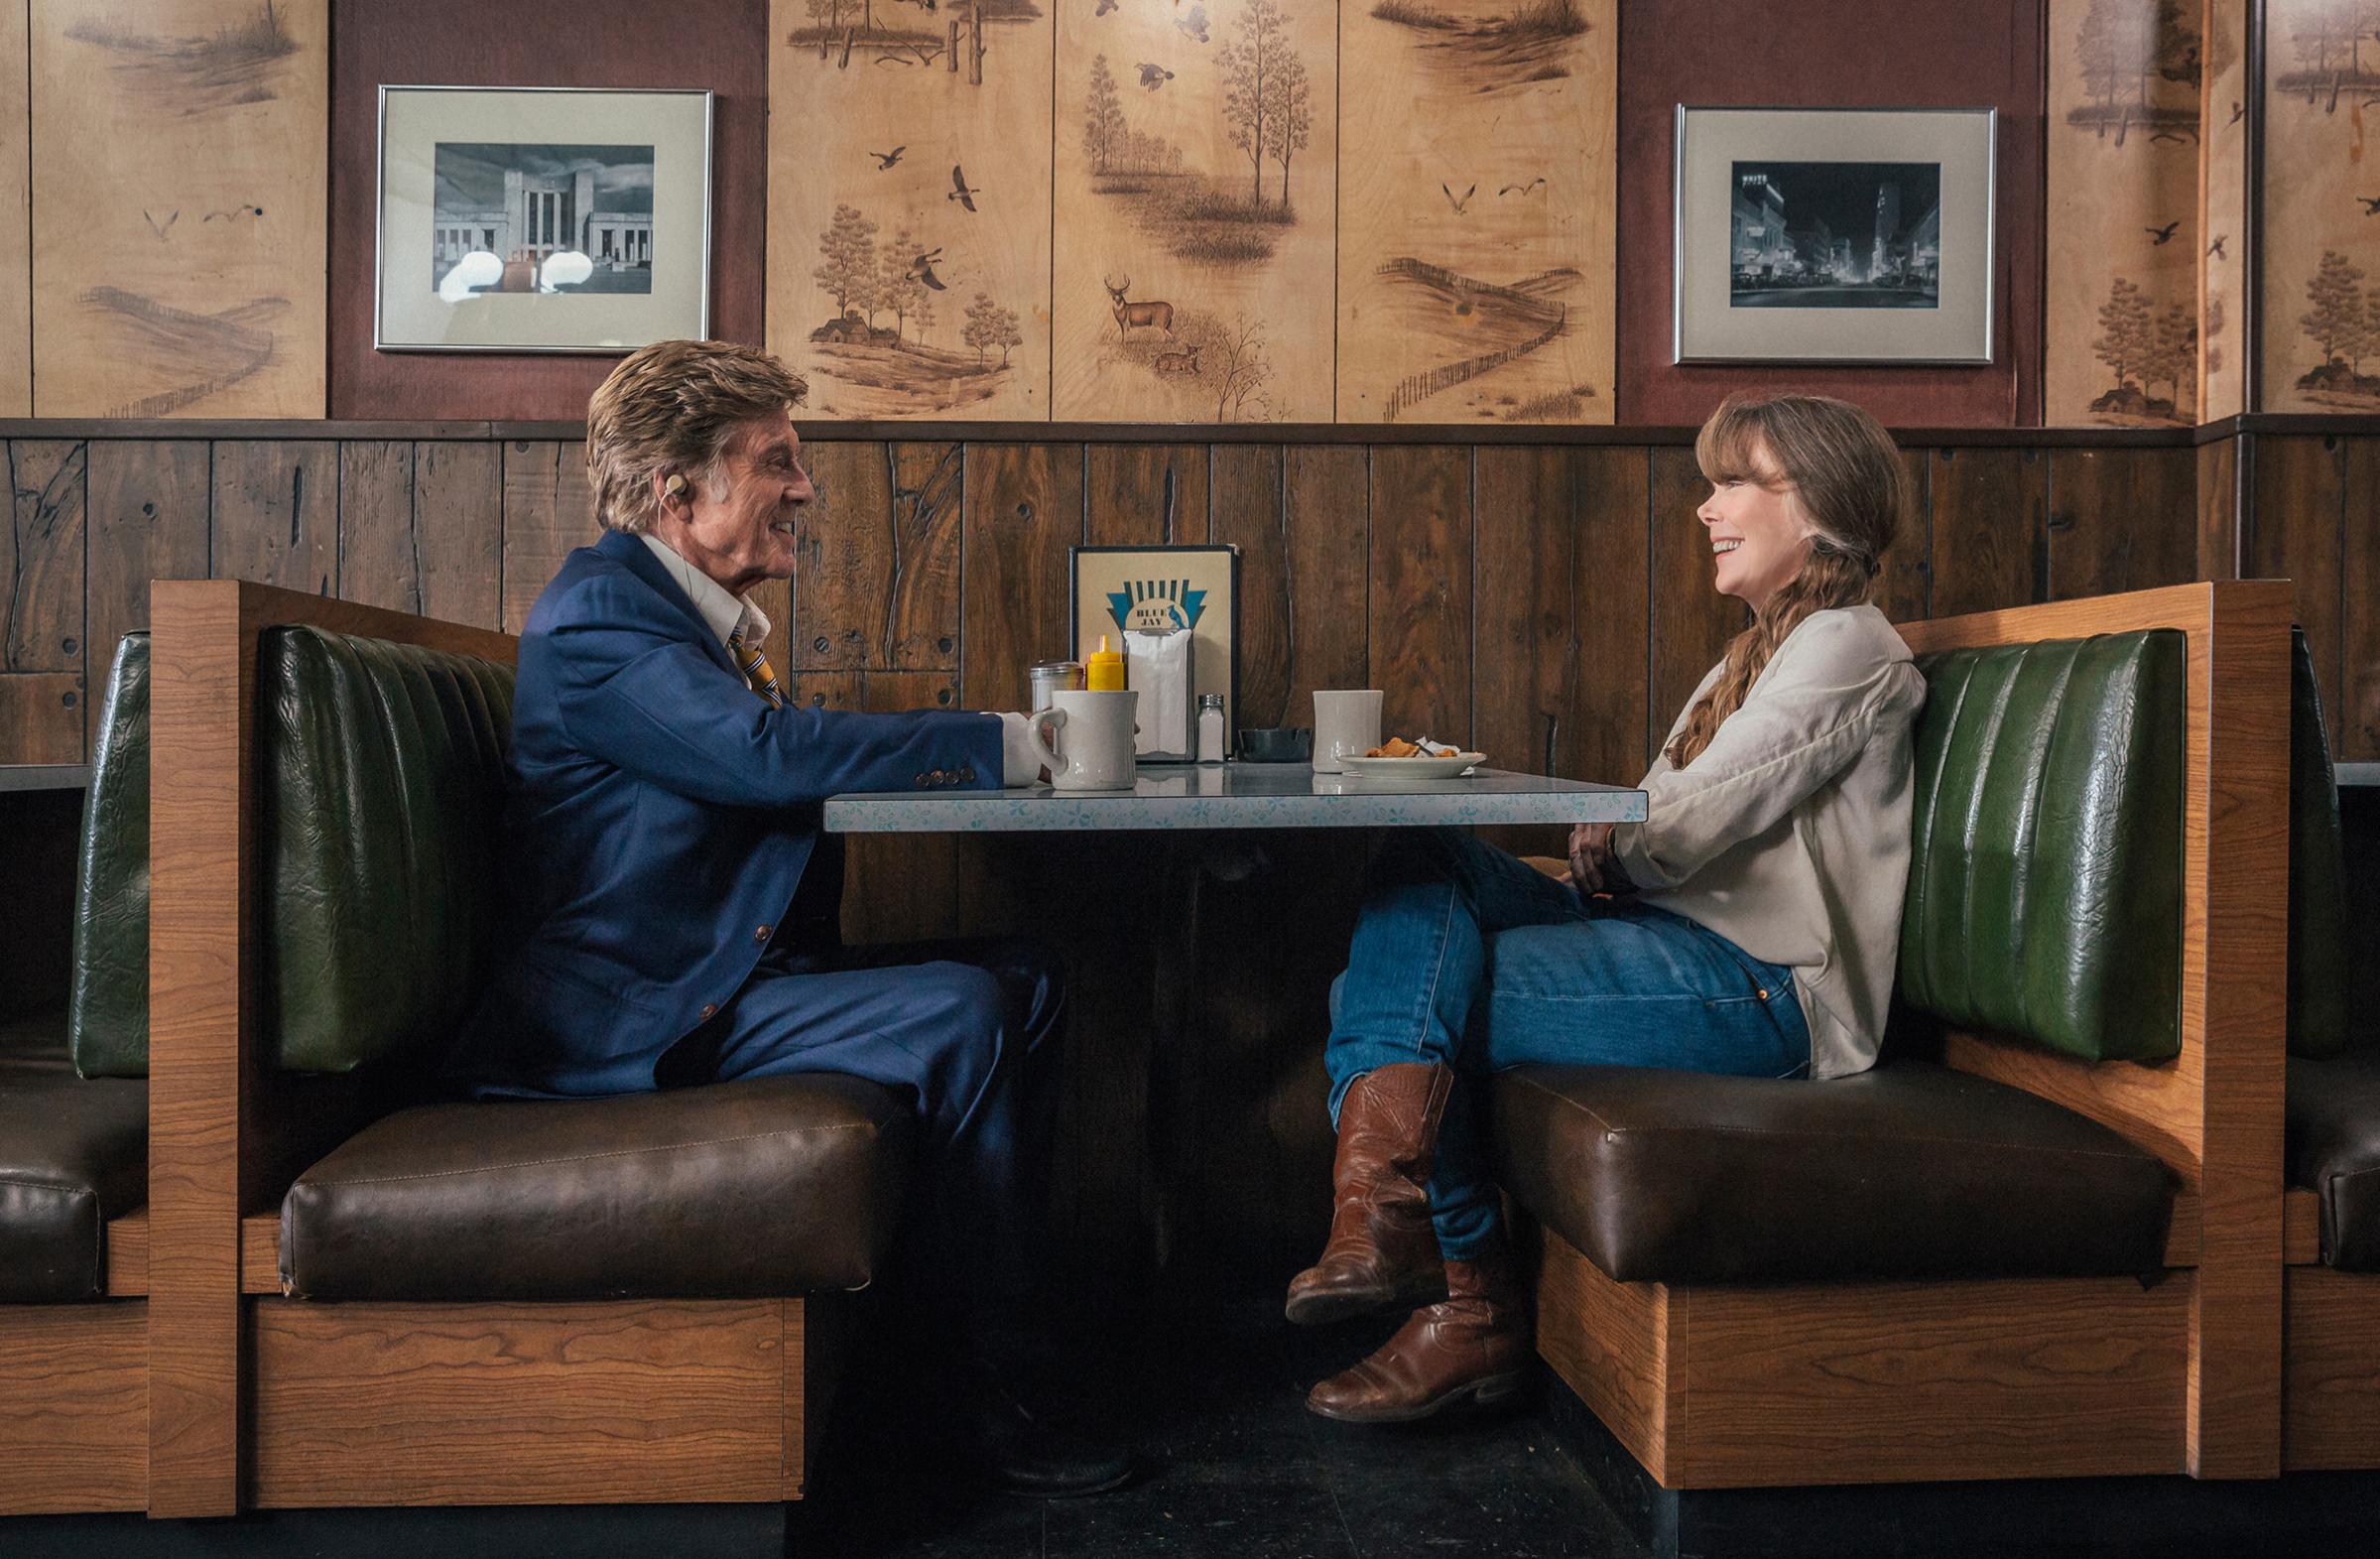 Robert Redford as "Forrest Tucker" and Sissy Spacek as "Jewel" in the film THE OLD MAN &amp; THE GUN. Photo by Eric Zachanowich. © 2018 Twentieth Century Fox Film Corporation All Rights Reserved